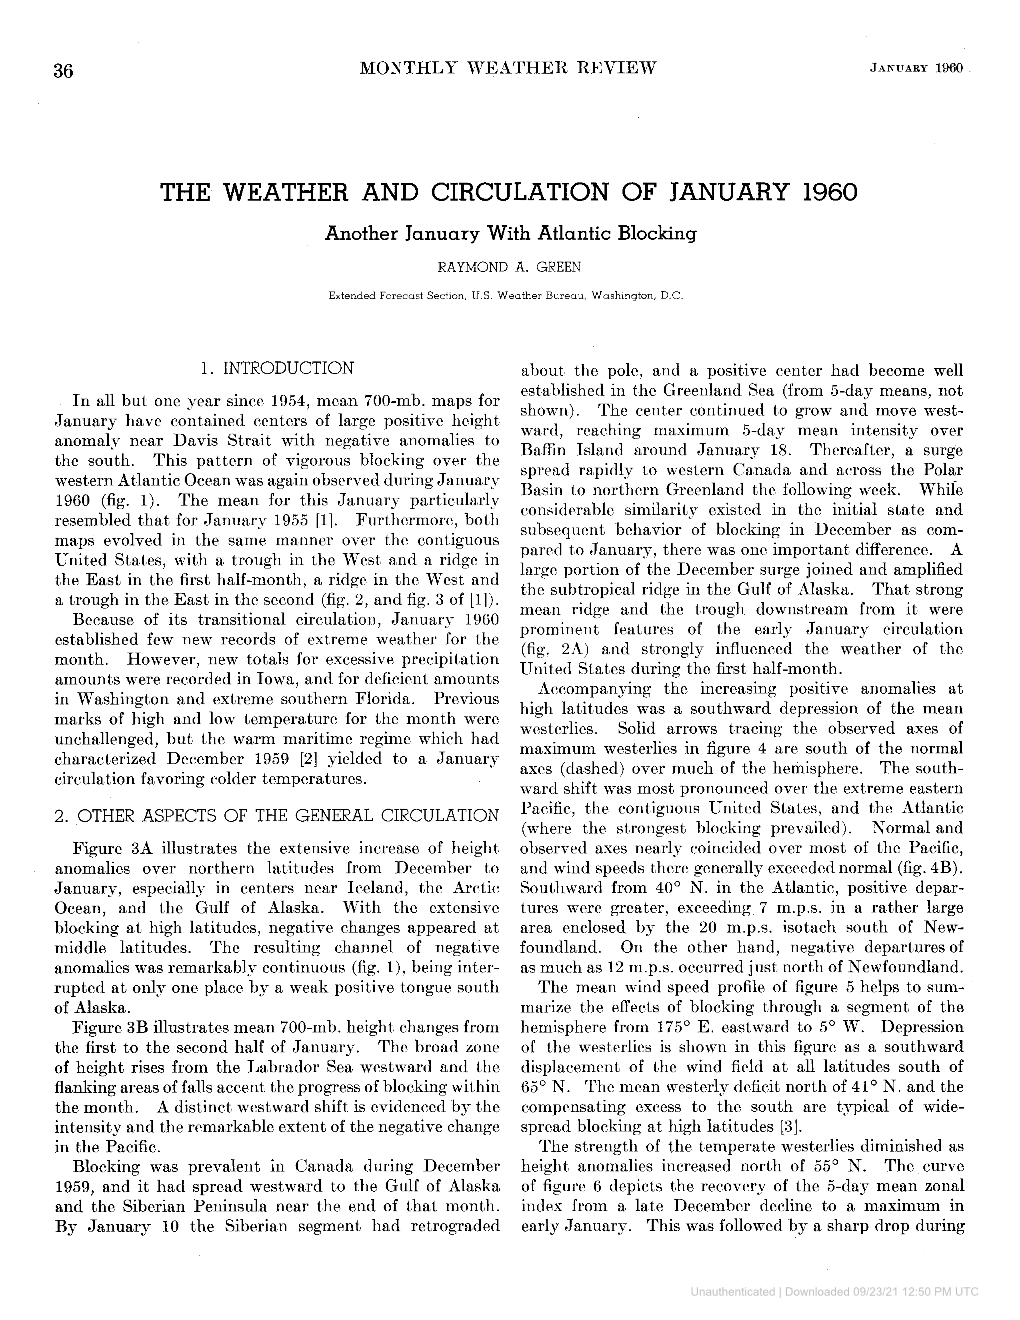 The Weather and Circulation of January 1960